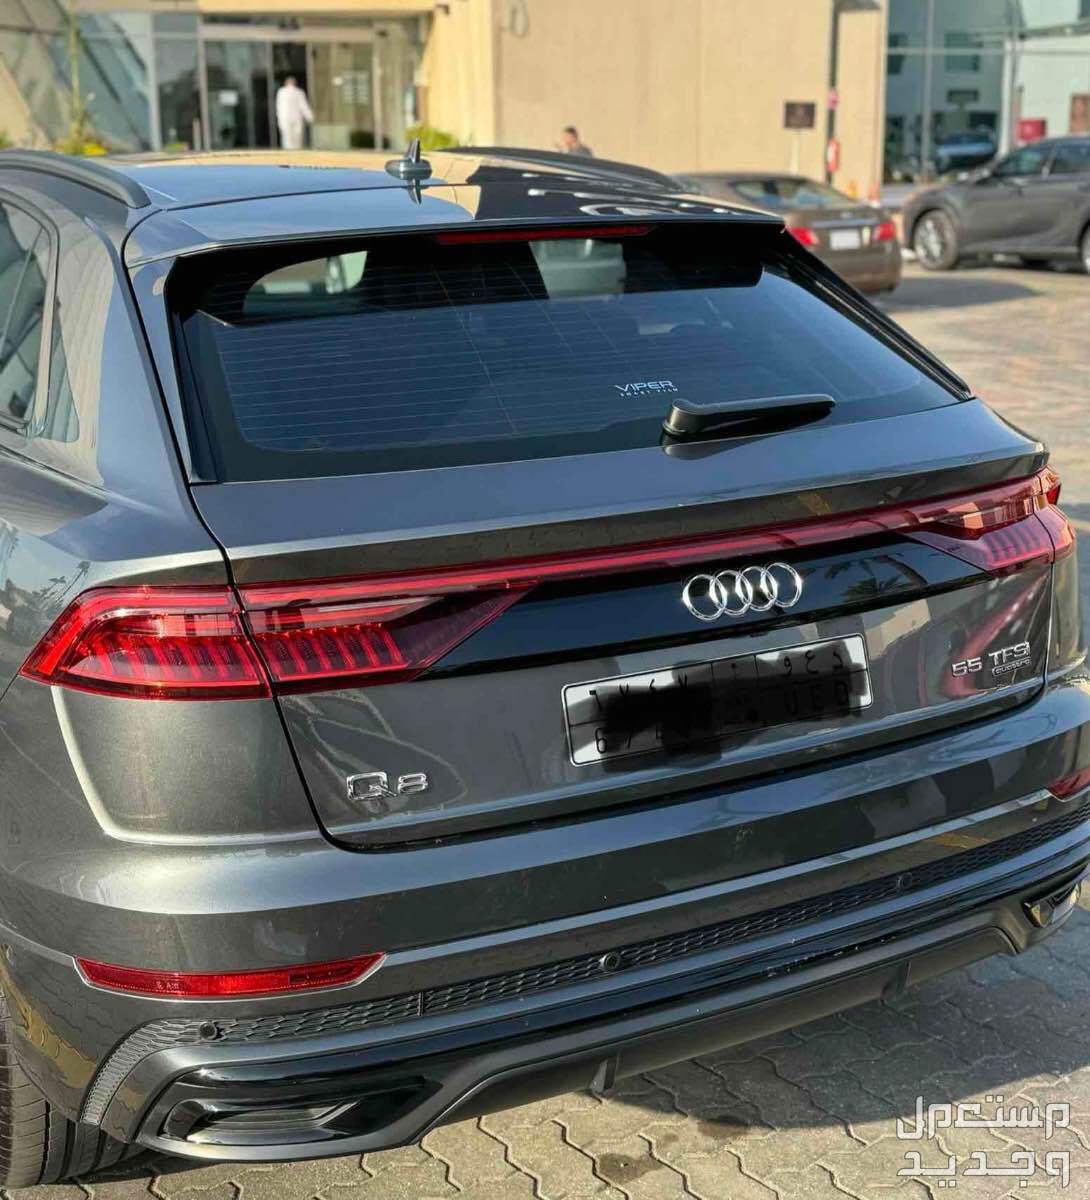 Audi Q8 2020 in Jeddah at a price of 230 thousands SAR